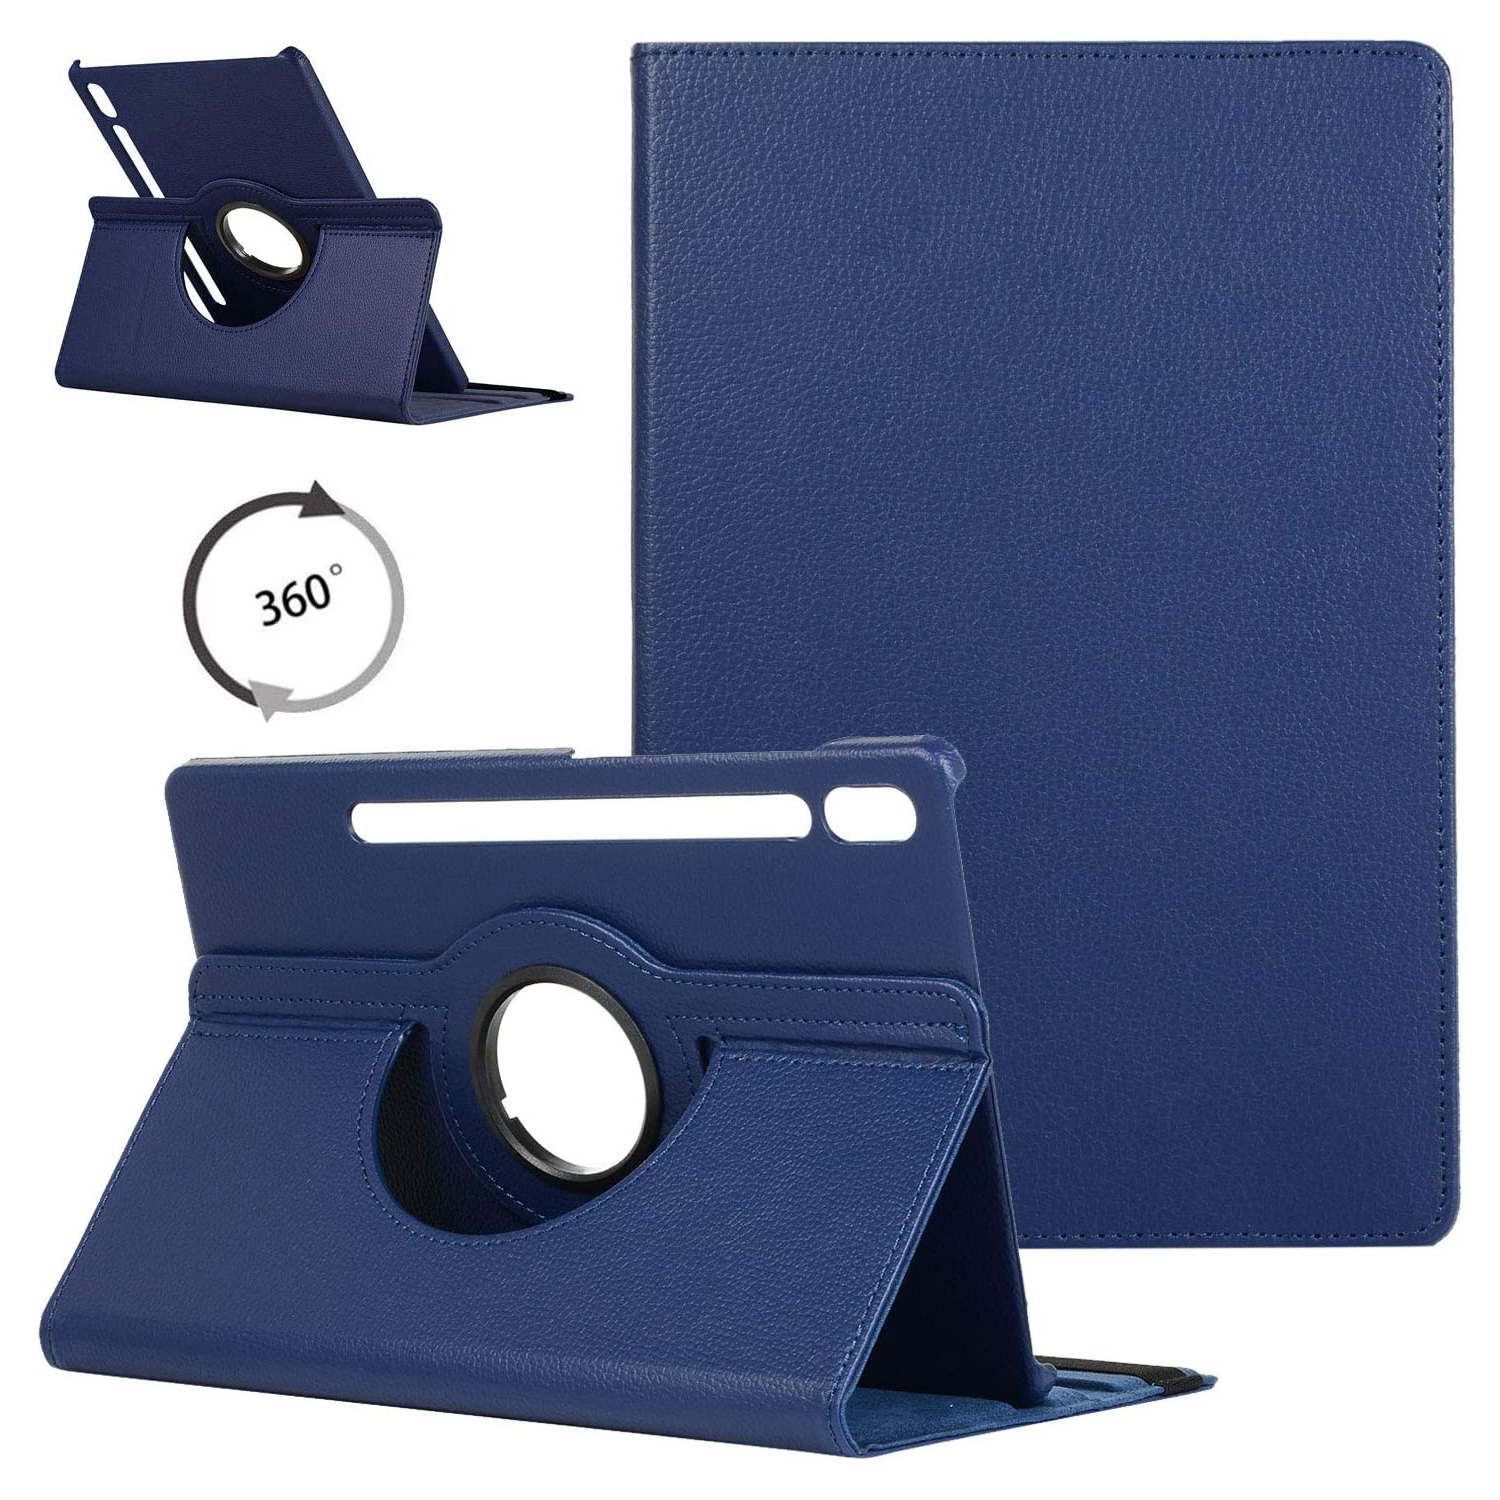 【CSmart】 360 Rotating PU Leather Stand Case Smart Cover for Samsung Galaxy Tab S6 10.5" 2019, T860 T865 T867, Navy